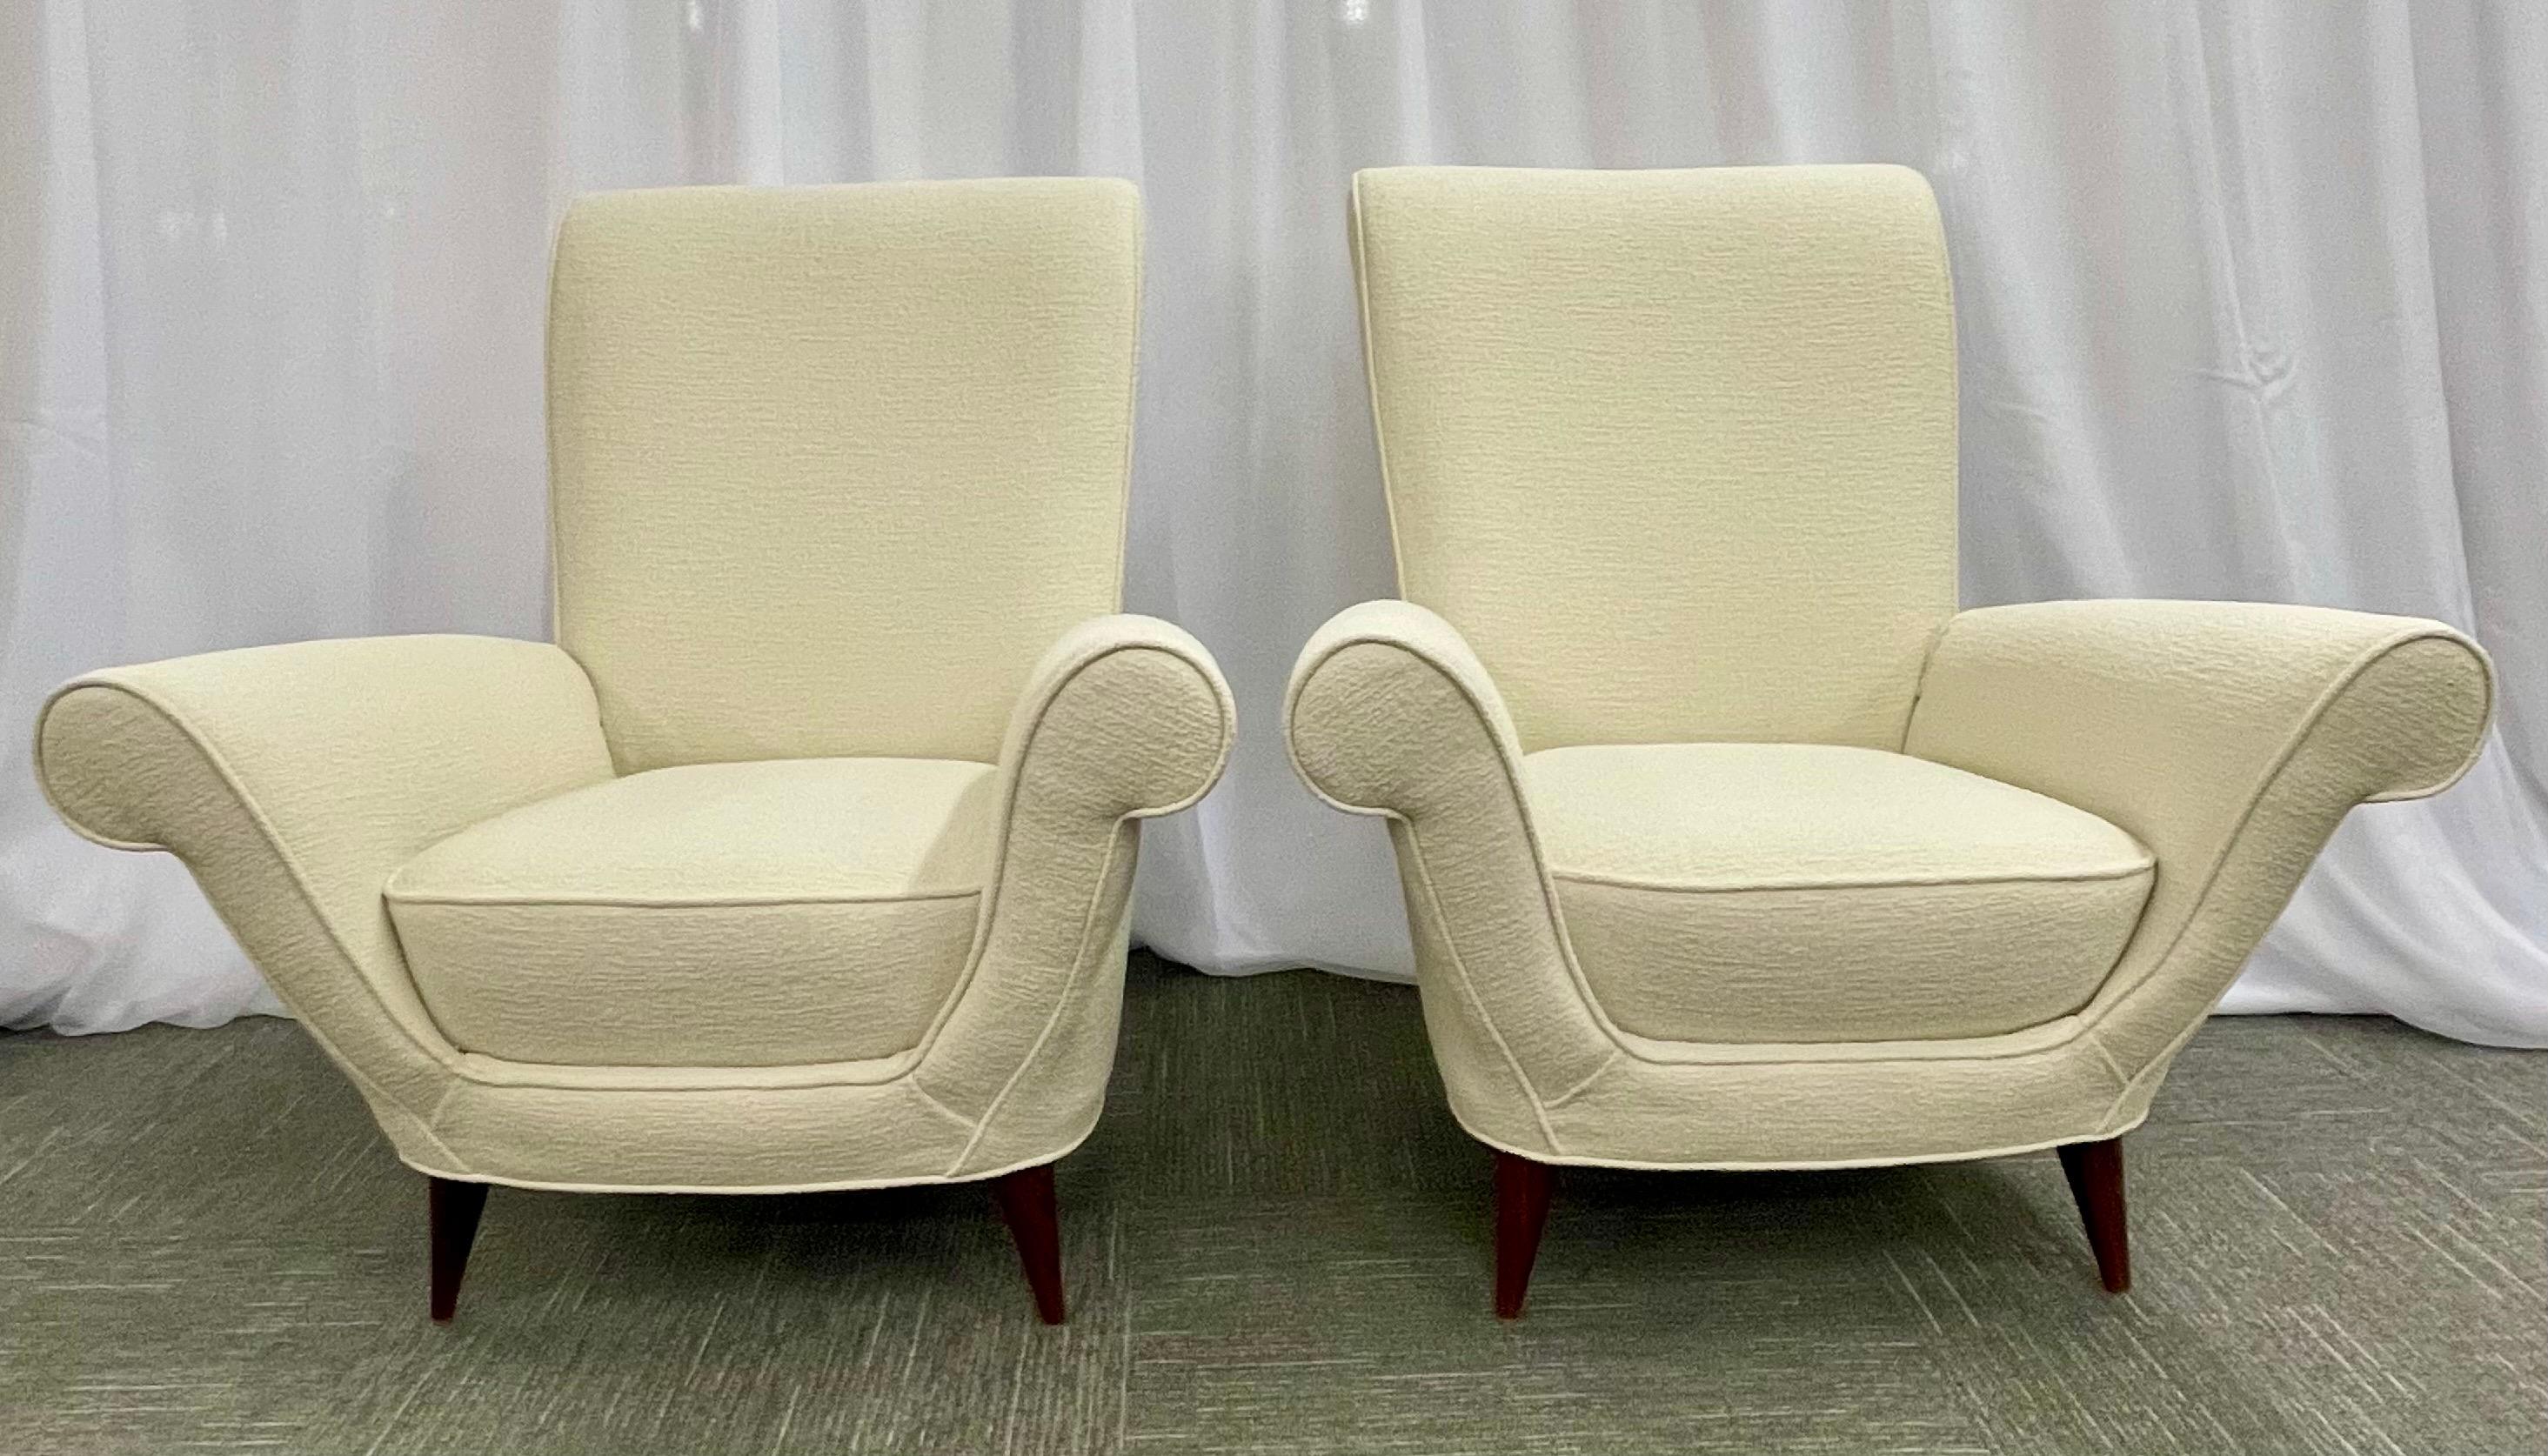 Fabric Paola Buffa Style, Mid-Century Modern, Lounge Chairs, White Bouclé, Italy, 1960s For Sale